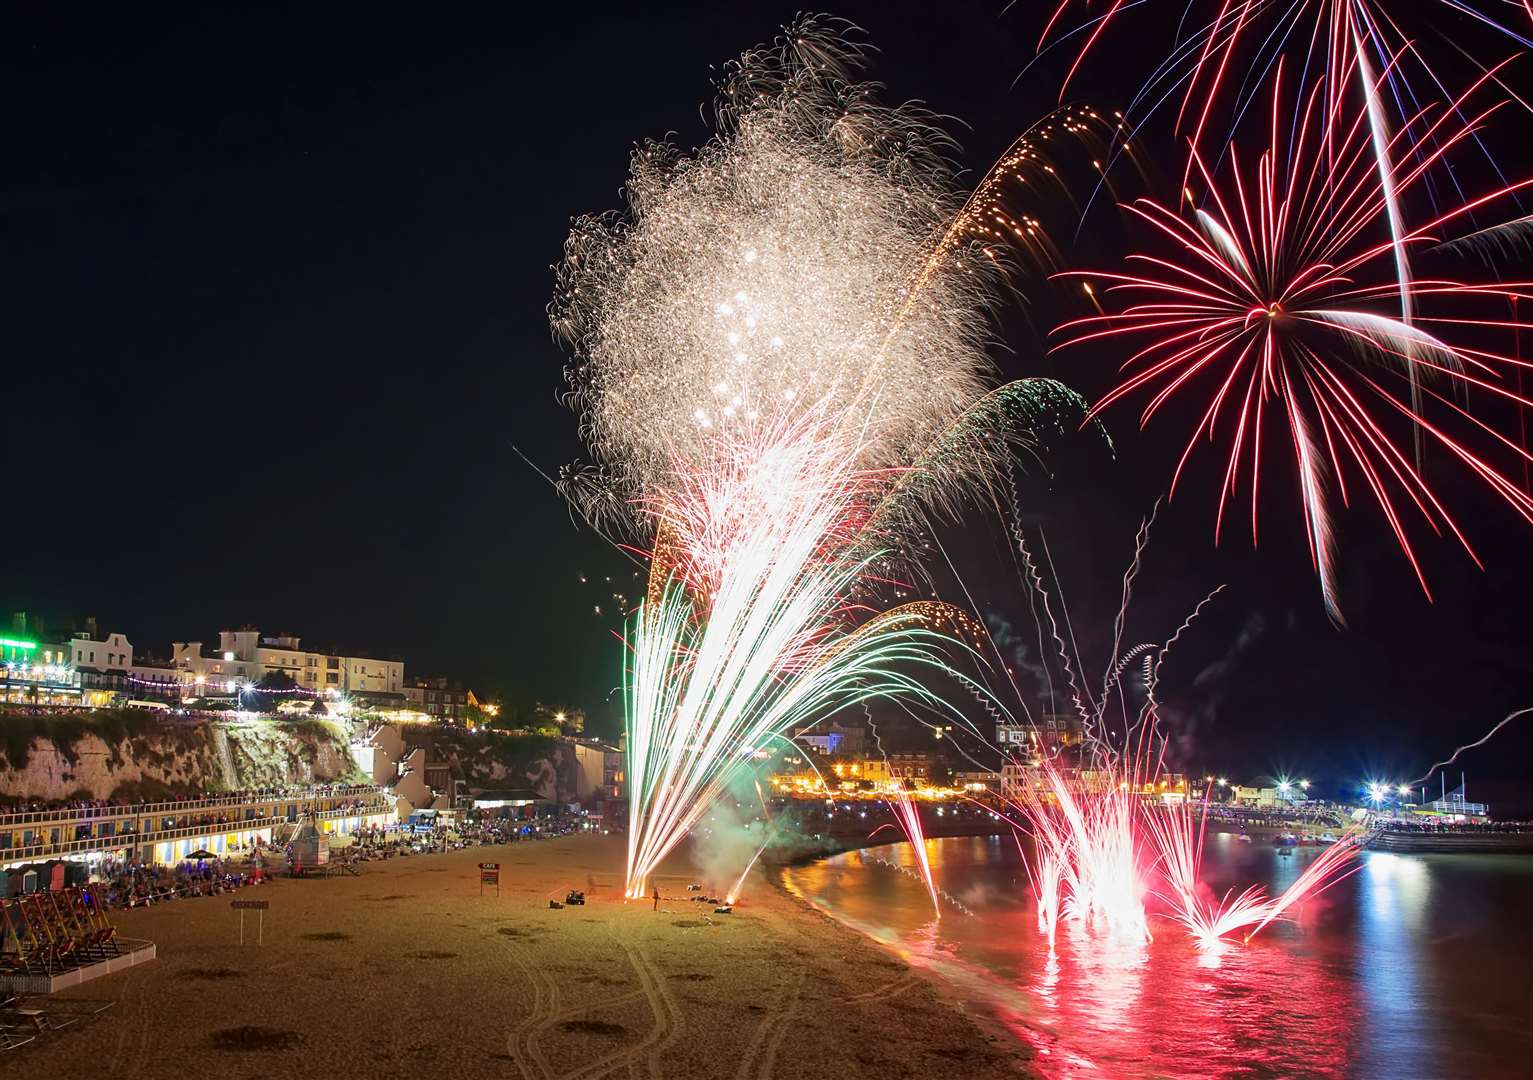 Terry Vick of Cliftonville took this shot at one of the Broadstairs fireworks displays this summer